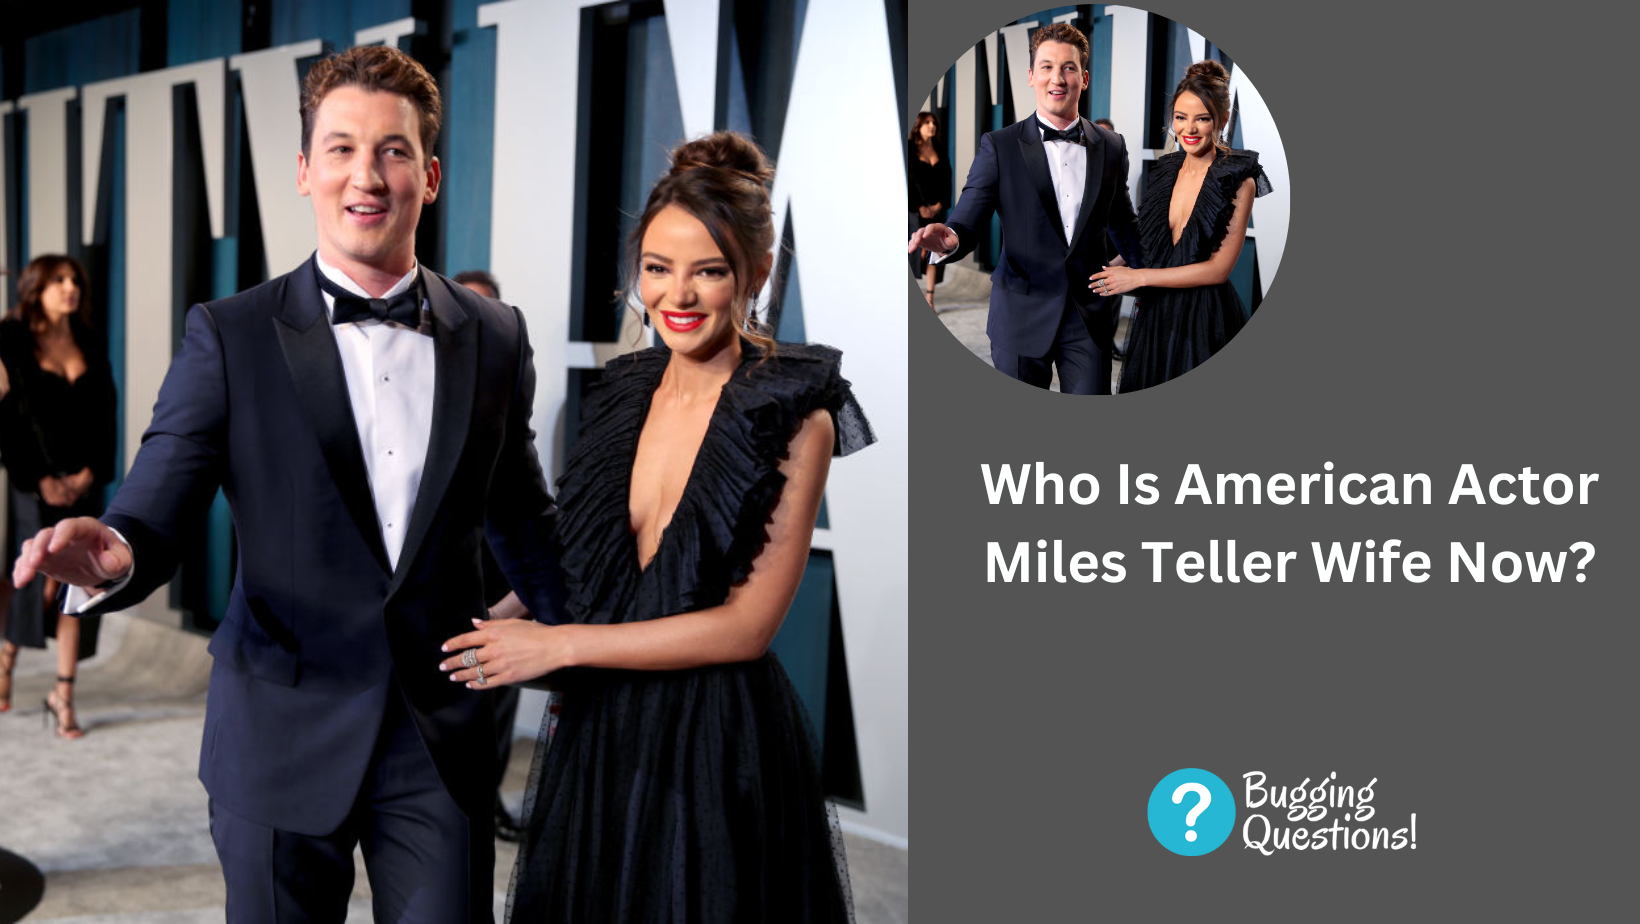 Who Is American Actor Miles Teller Wife Now?